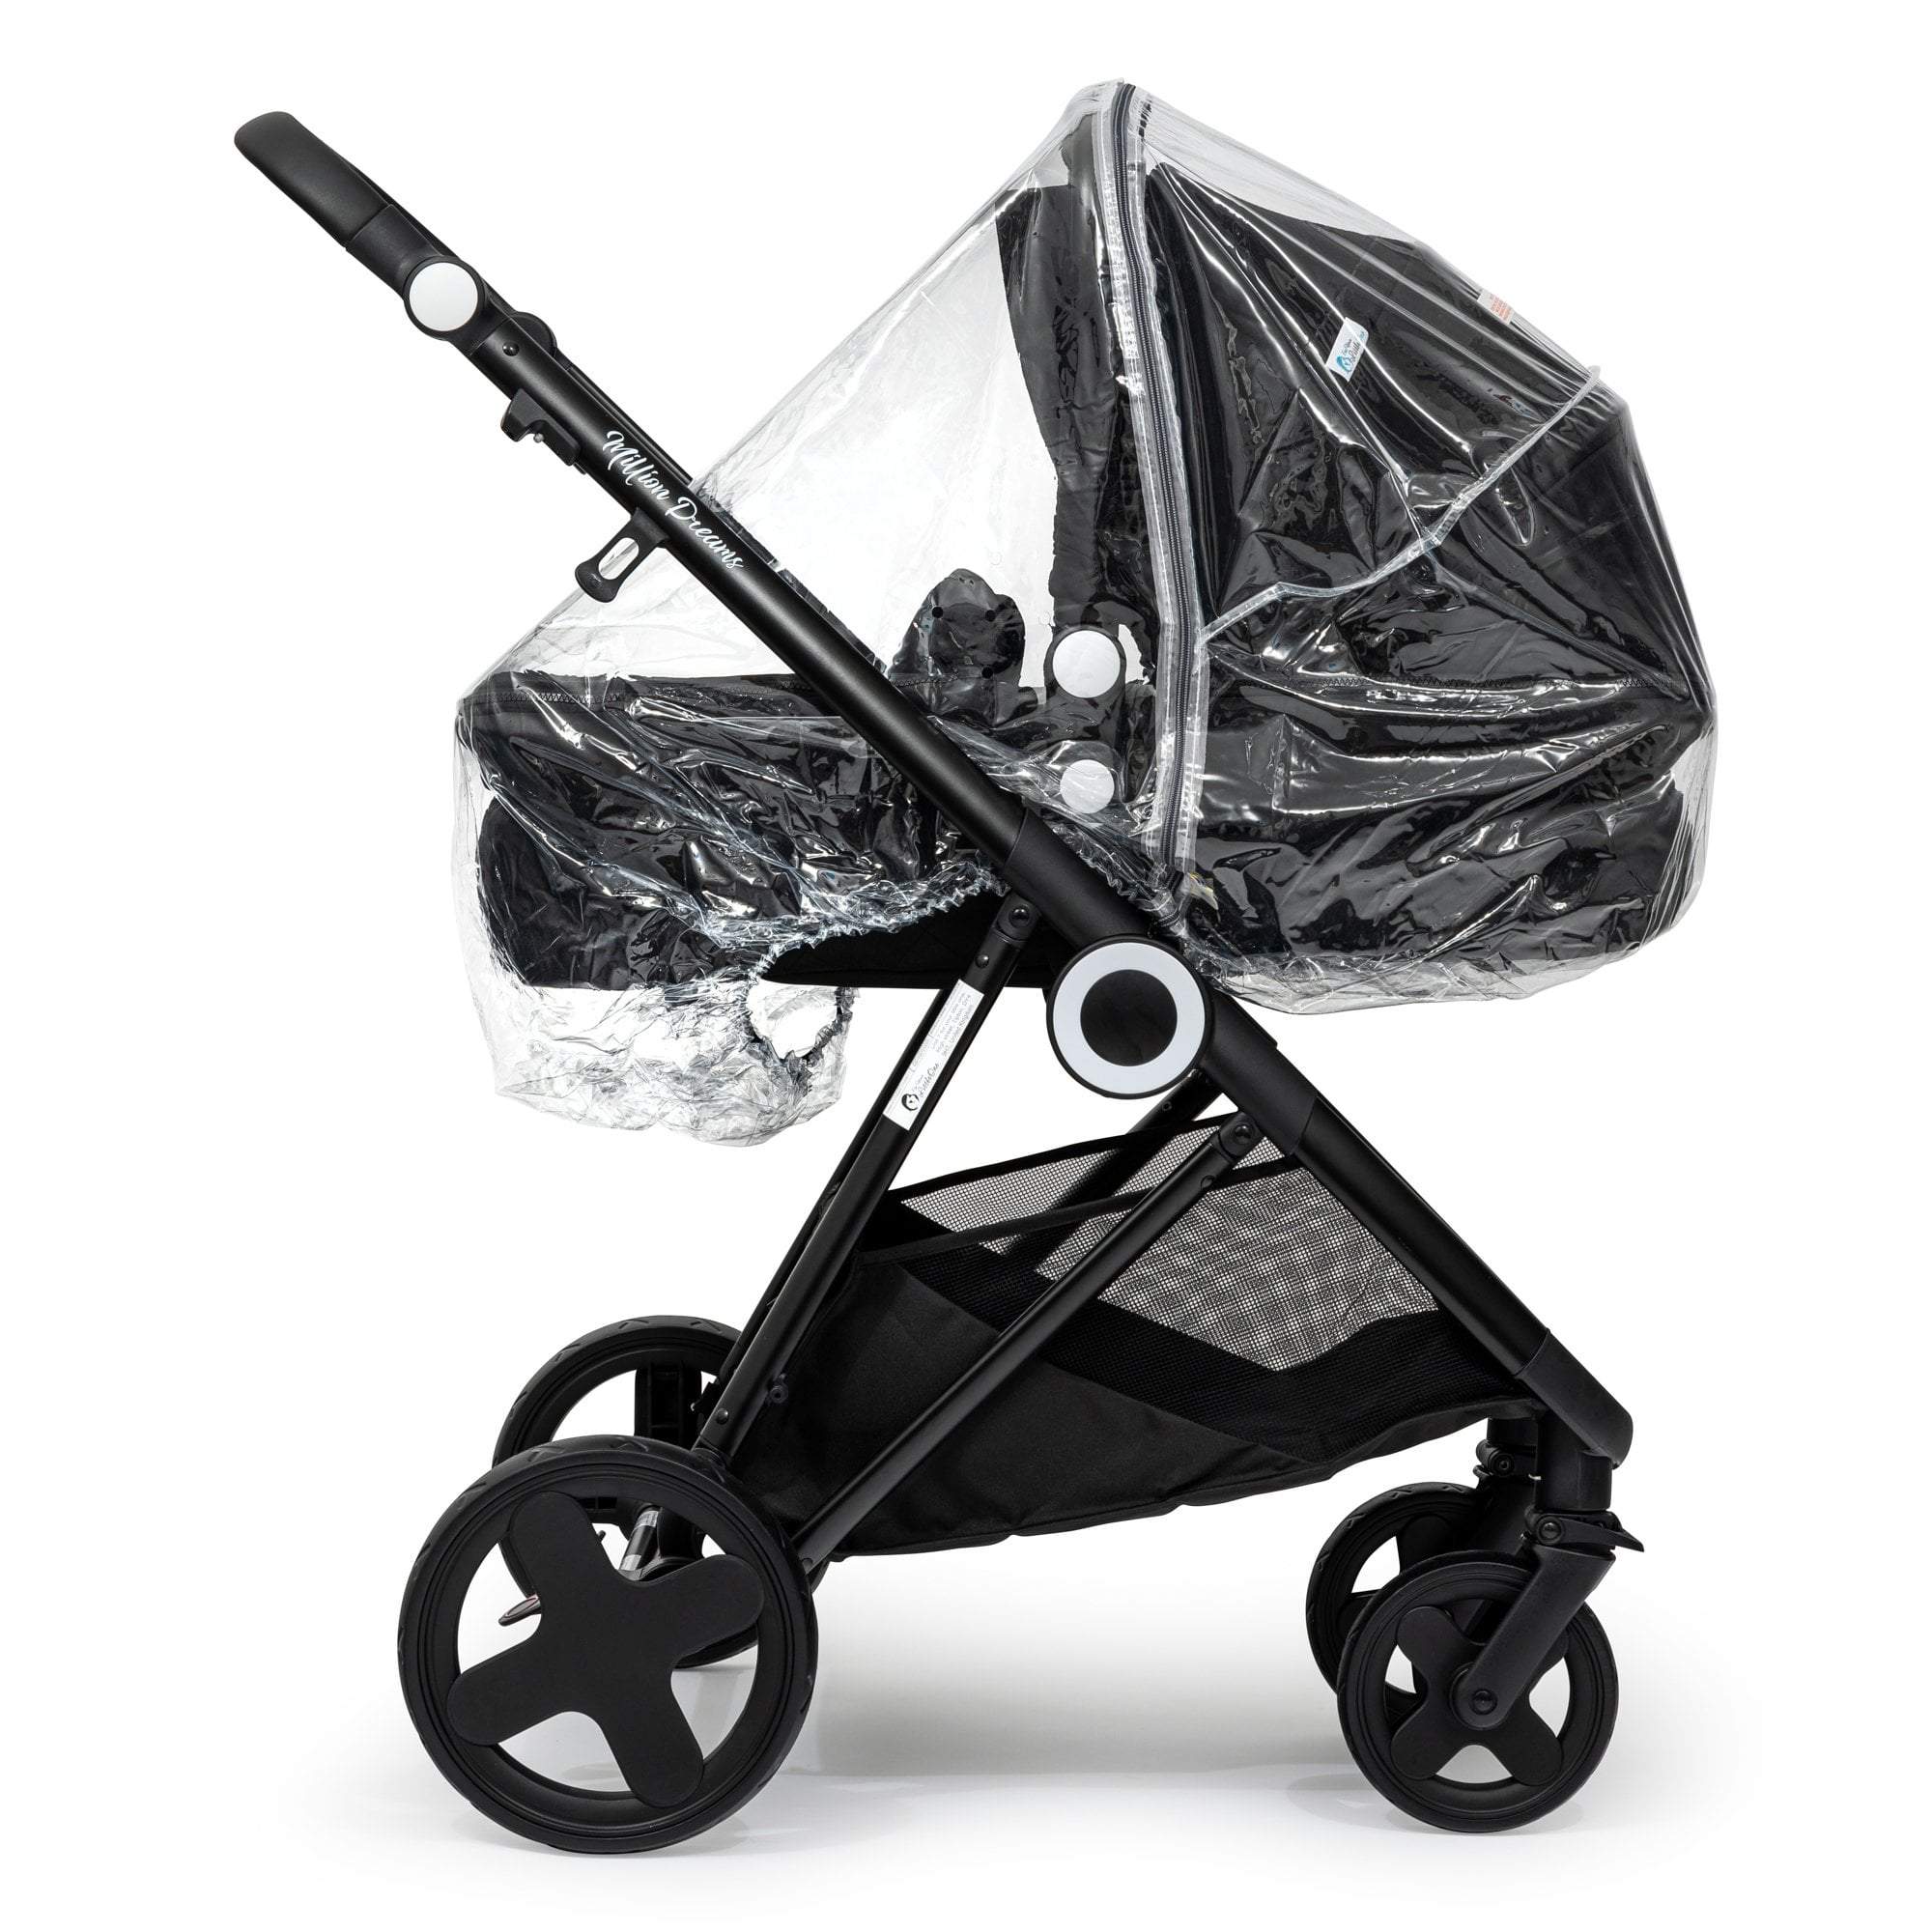 Carrycot Raincover Compatible With Seed - Fits All Models - For Your Little One